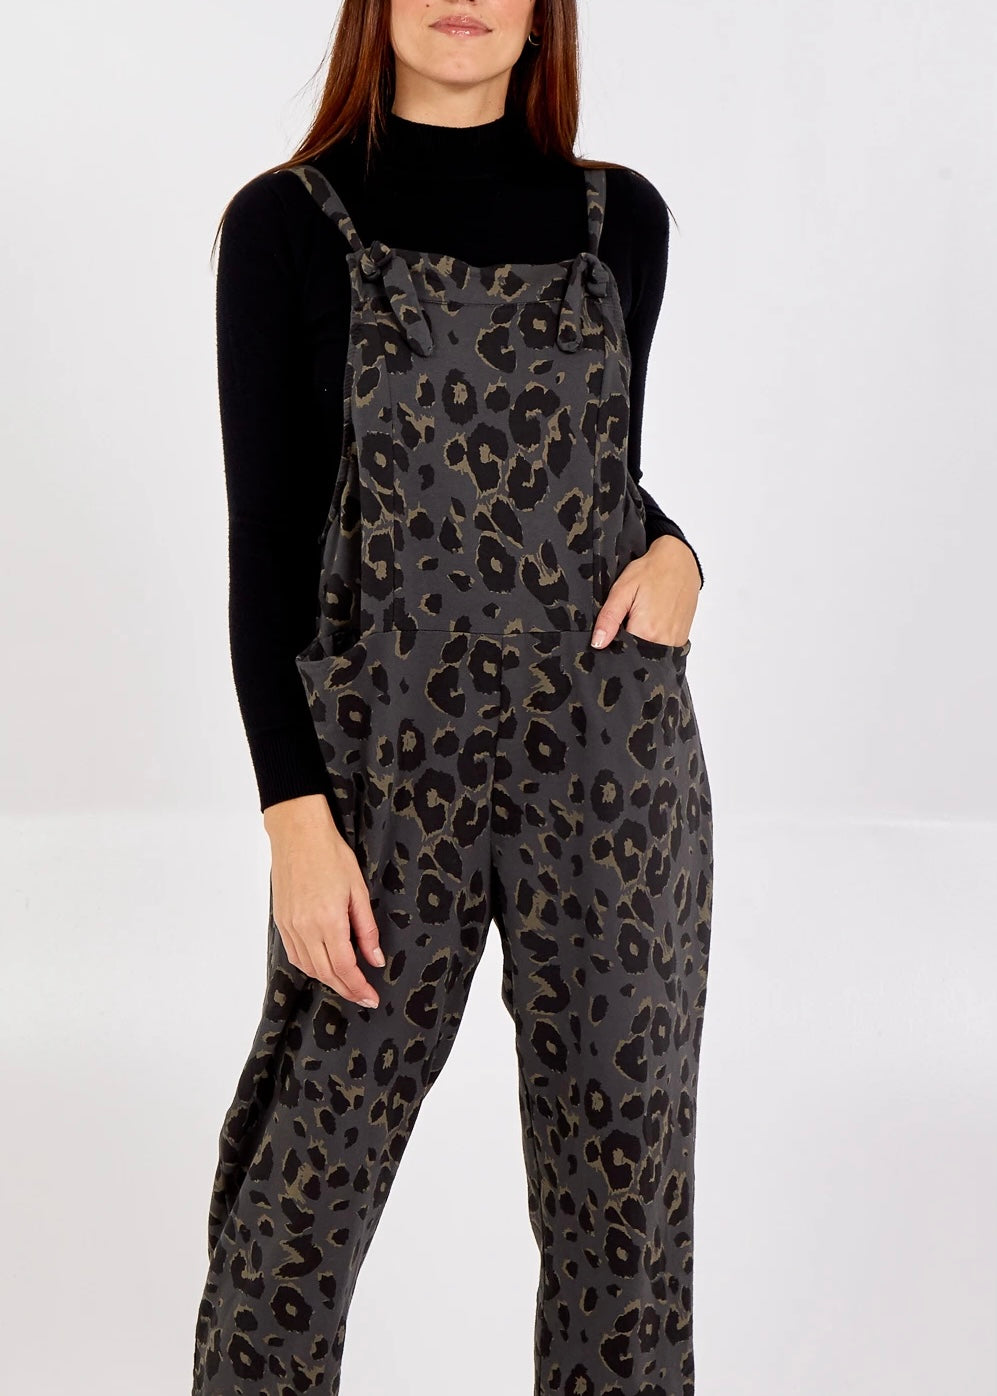 Porthleven Dungarees with pockets in charcoal with leopard print pattern and tie up straps